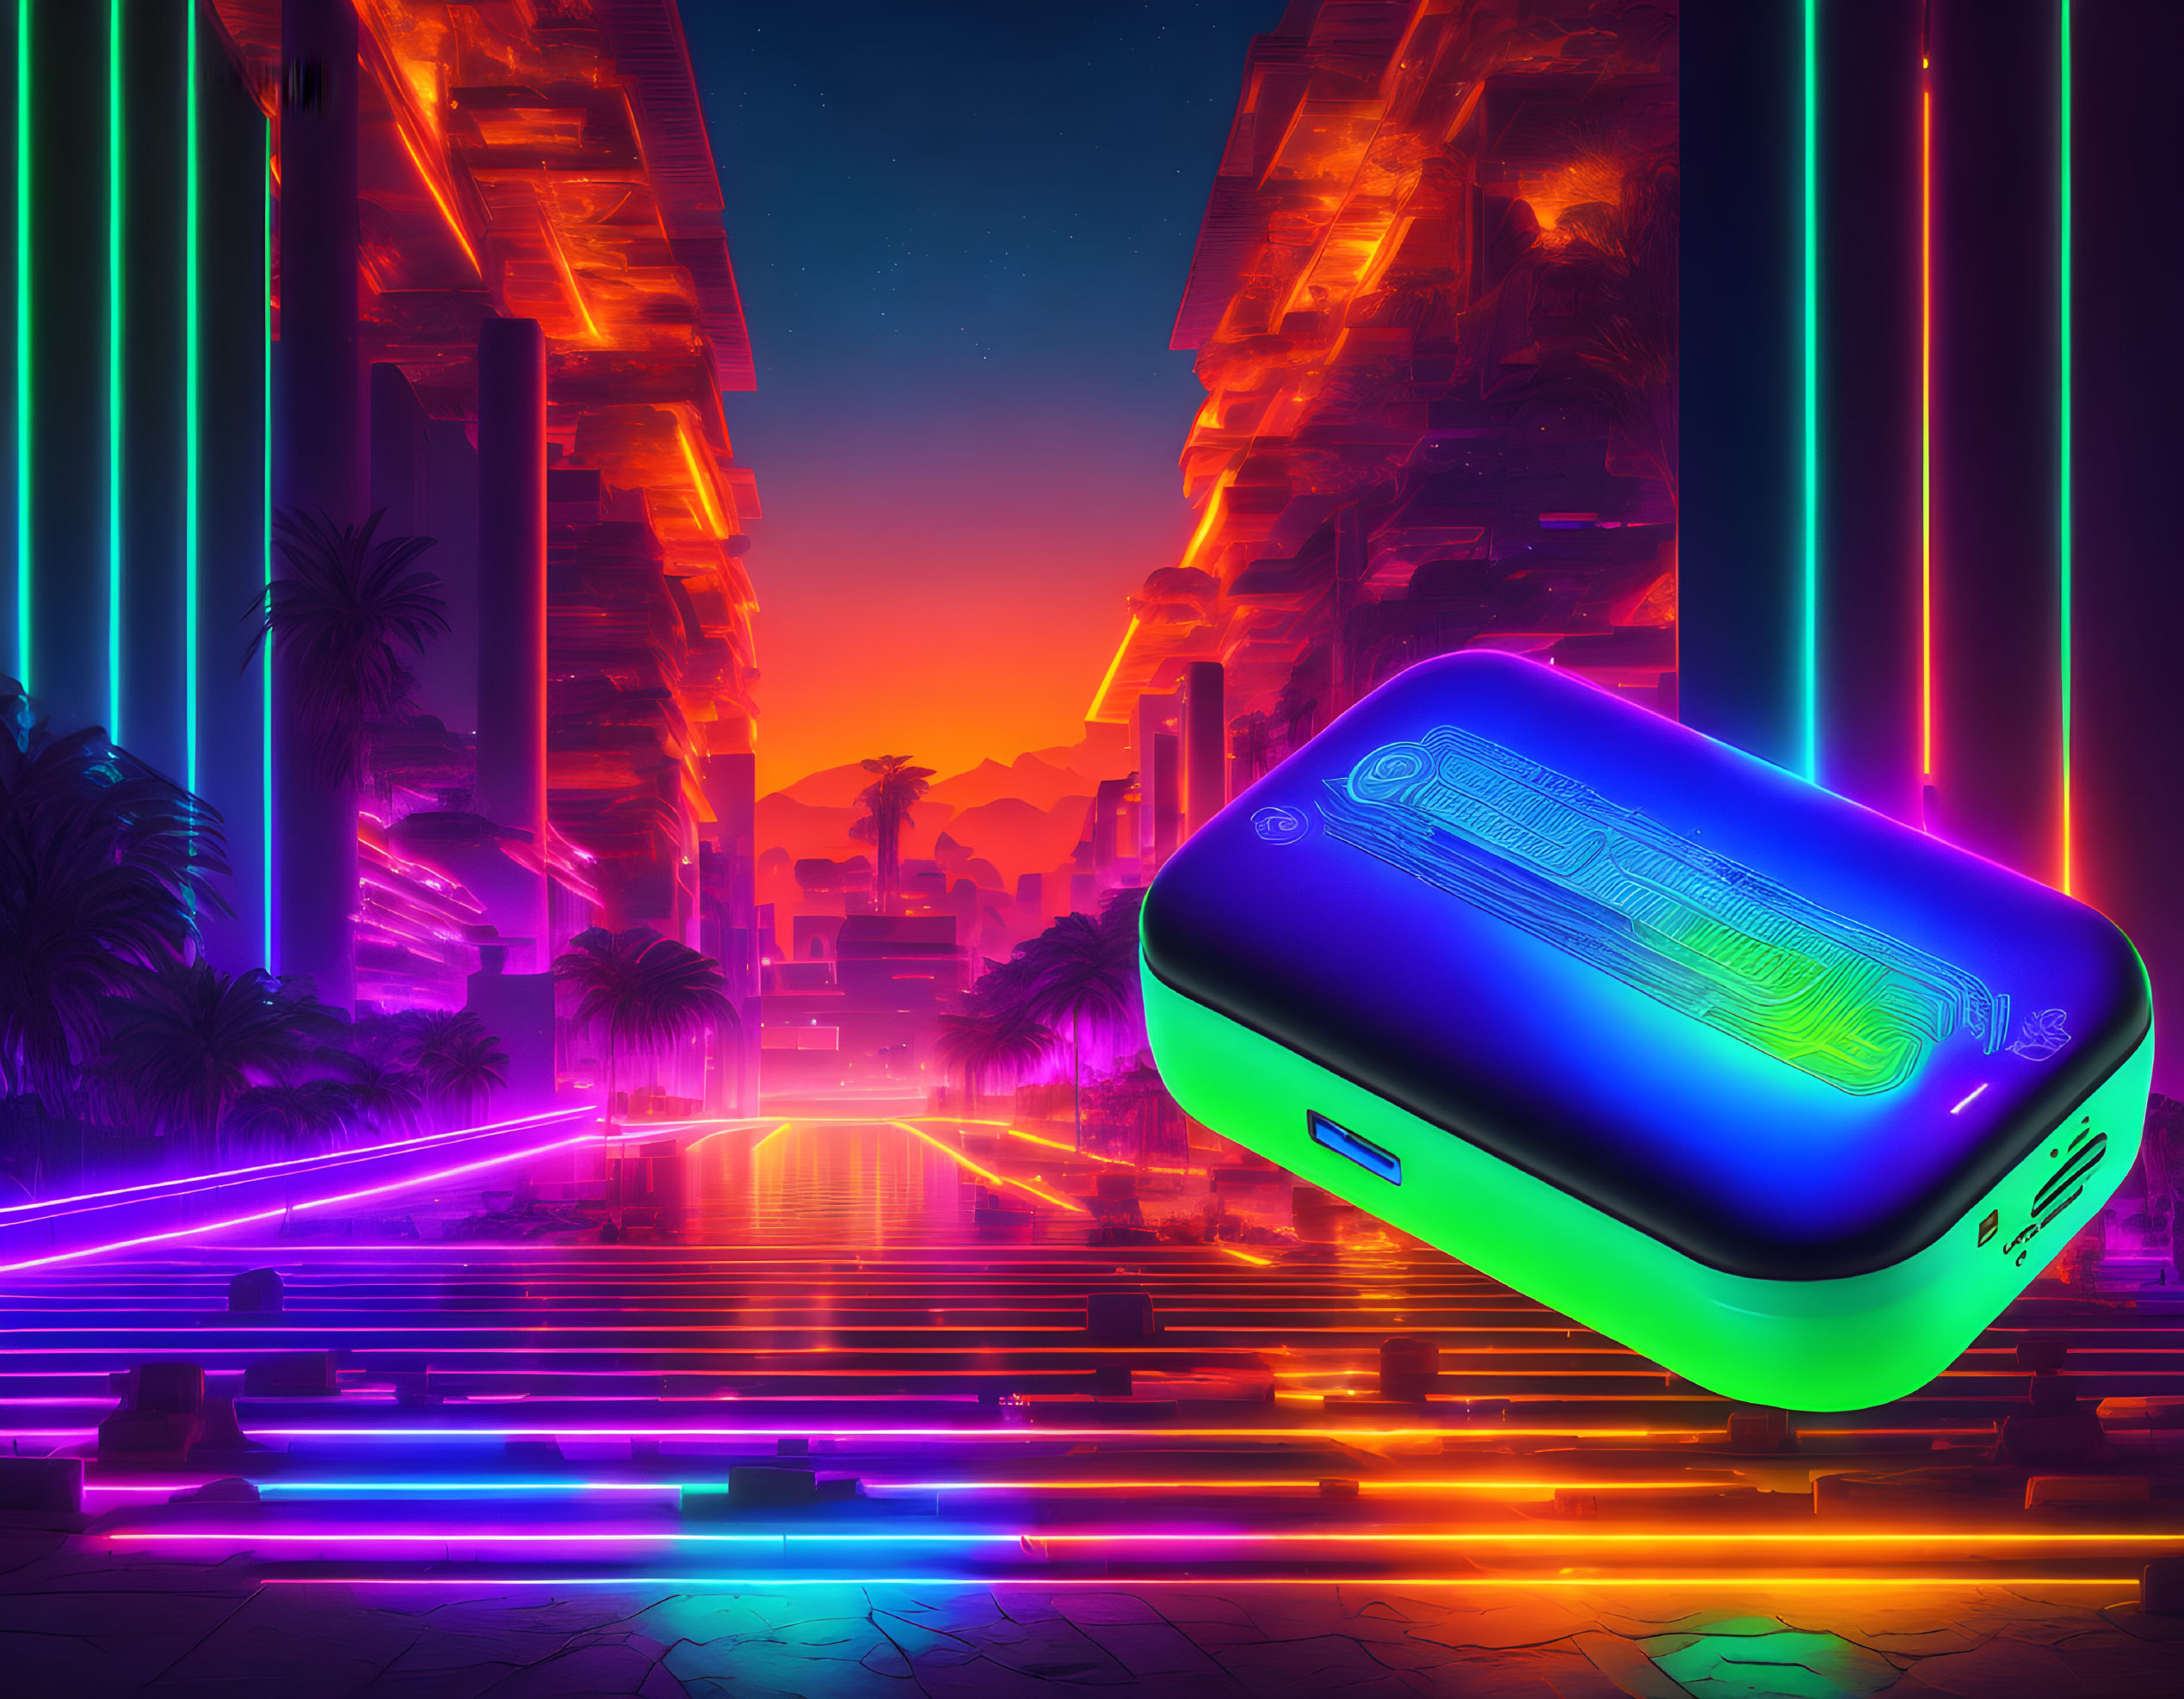 Futuristic neon-lit cityscape with holographic power bank